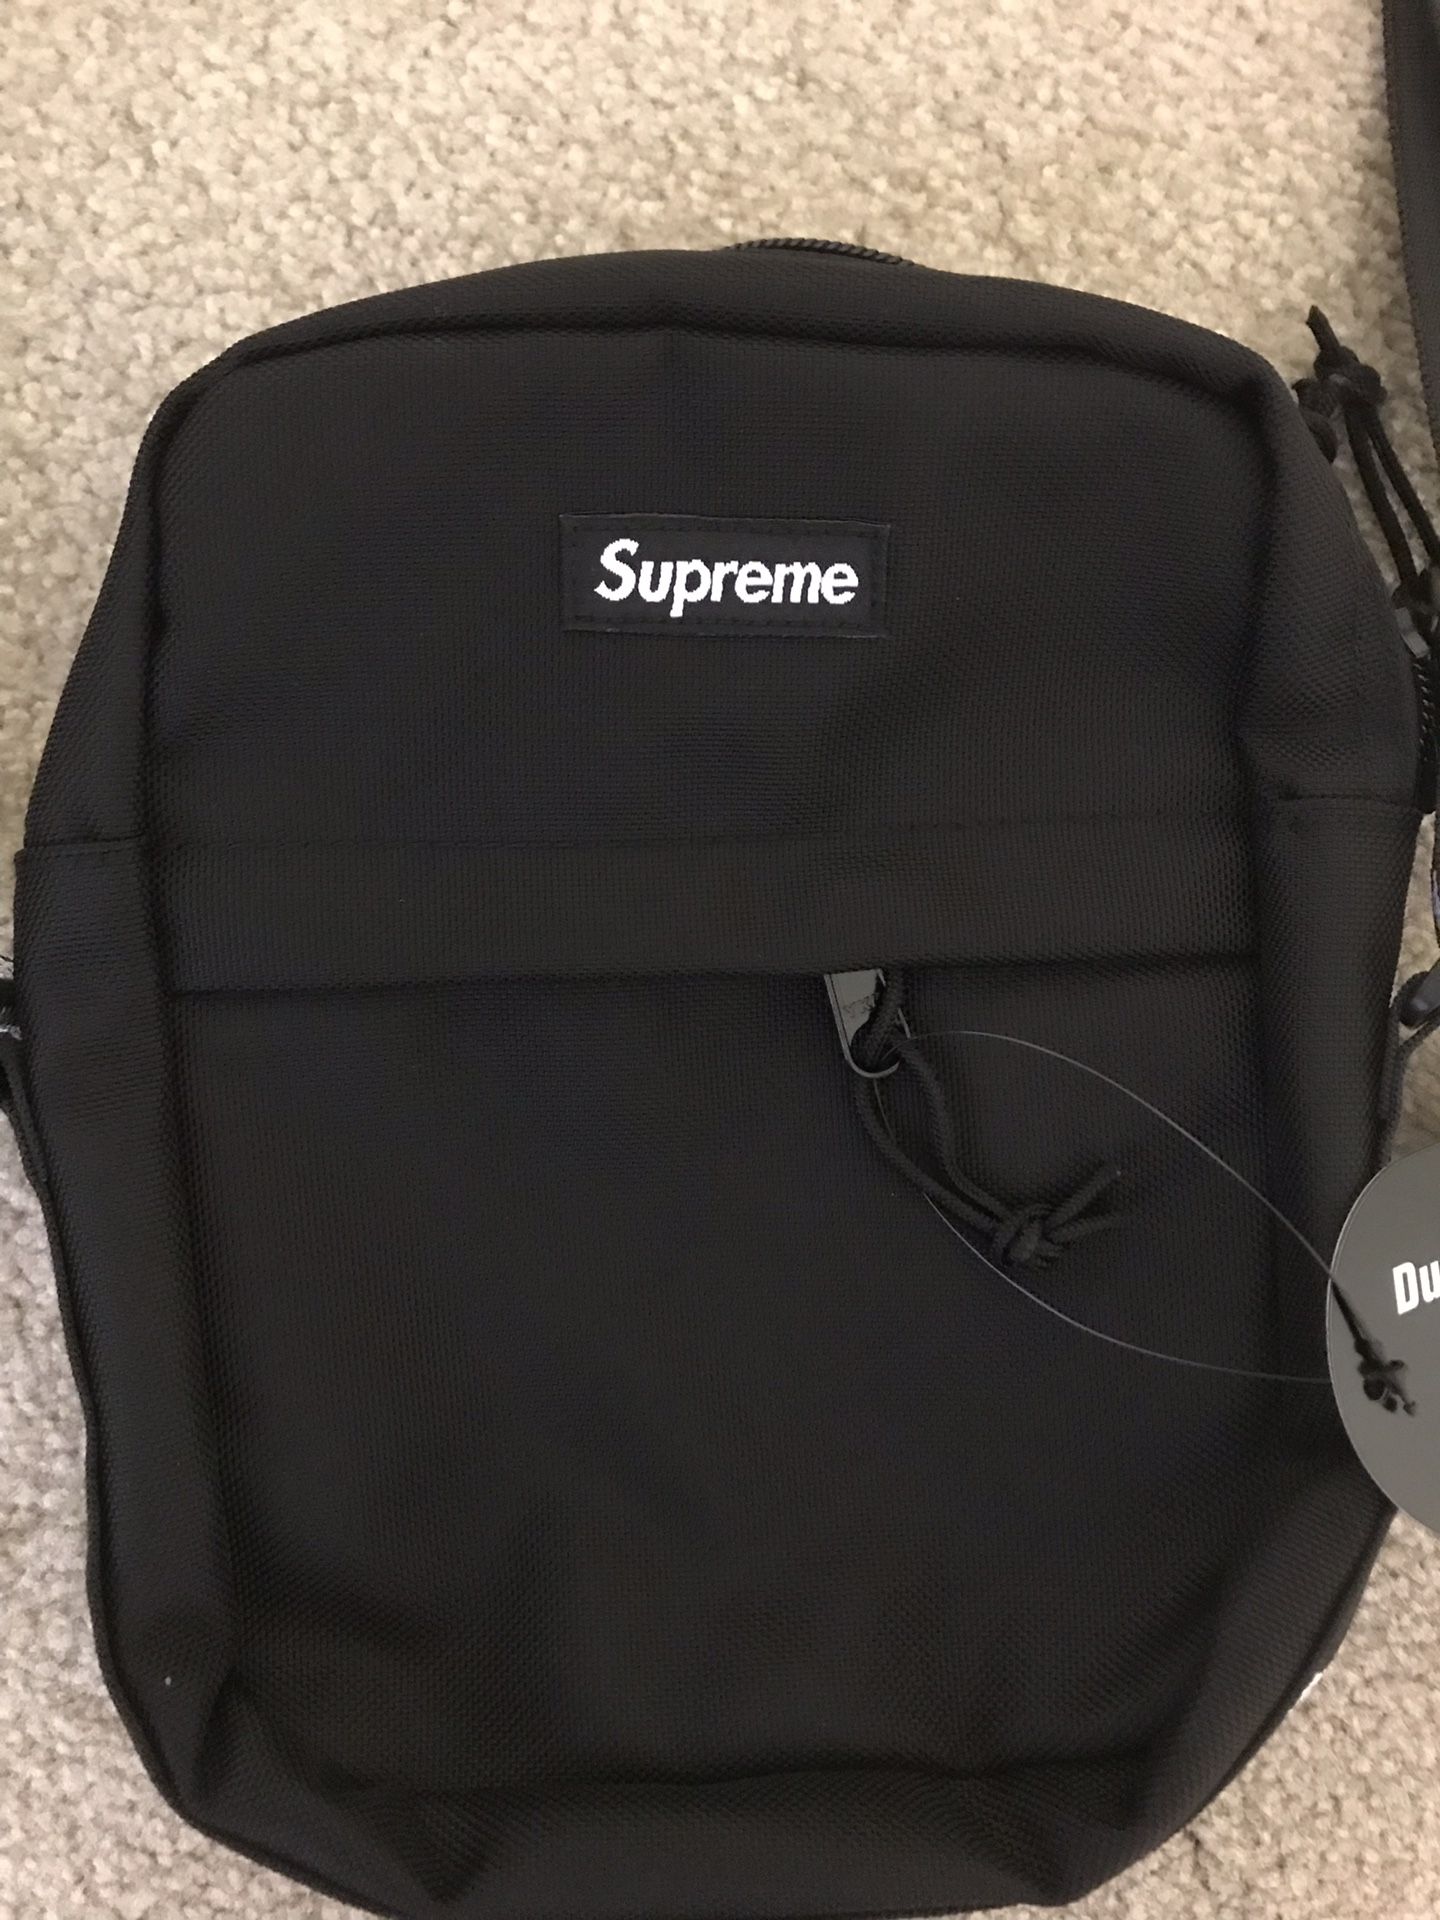 Red Supreme Shoulder Bag SS19 for Sale in Anaheim, CA - OfferUp